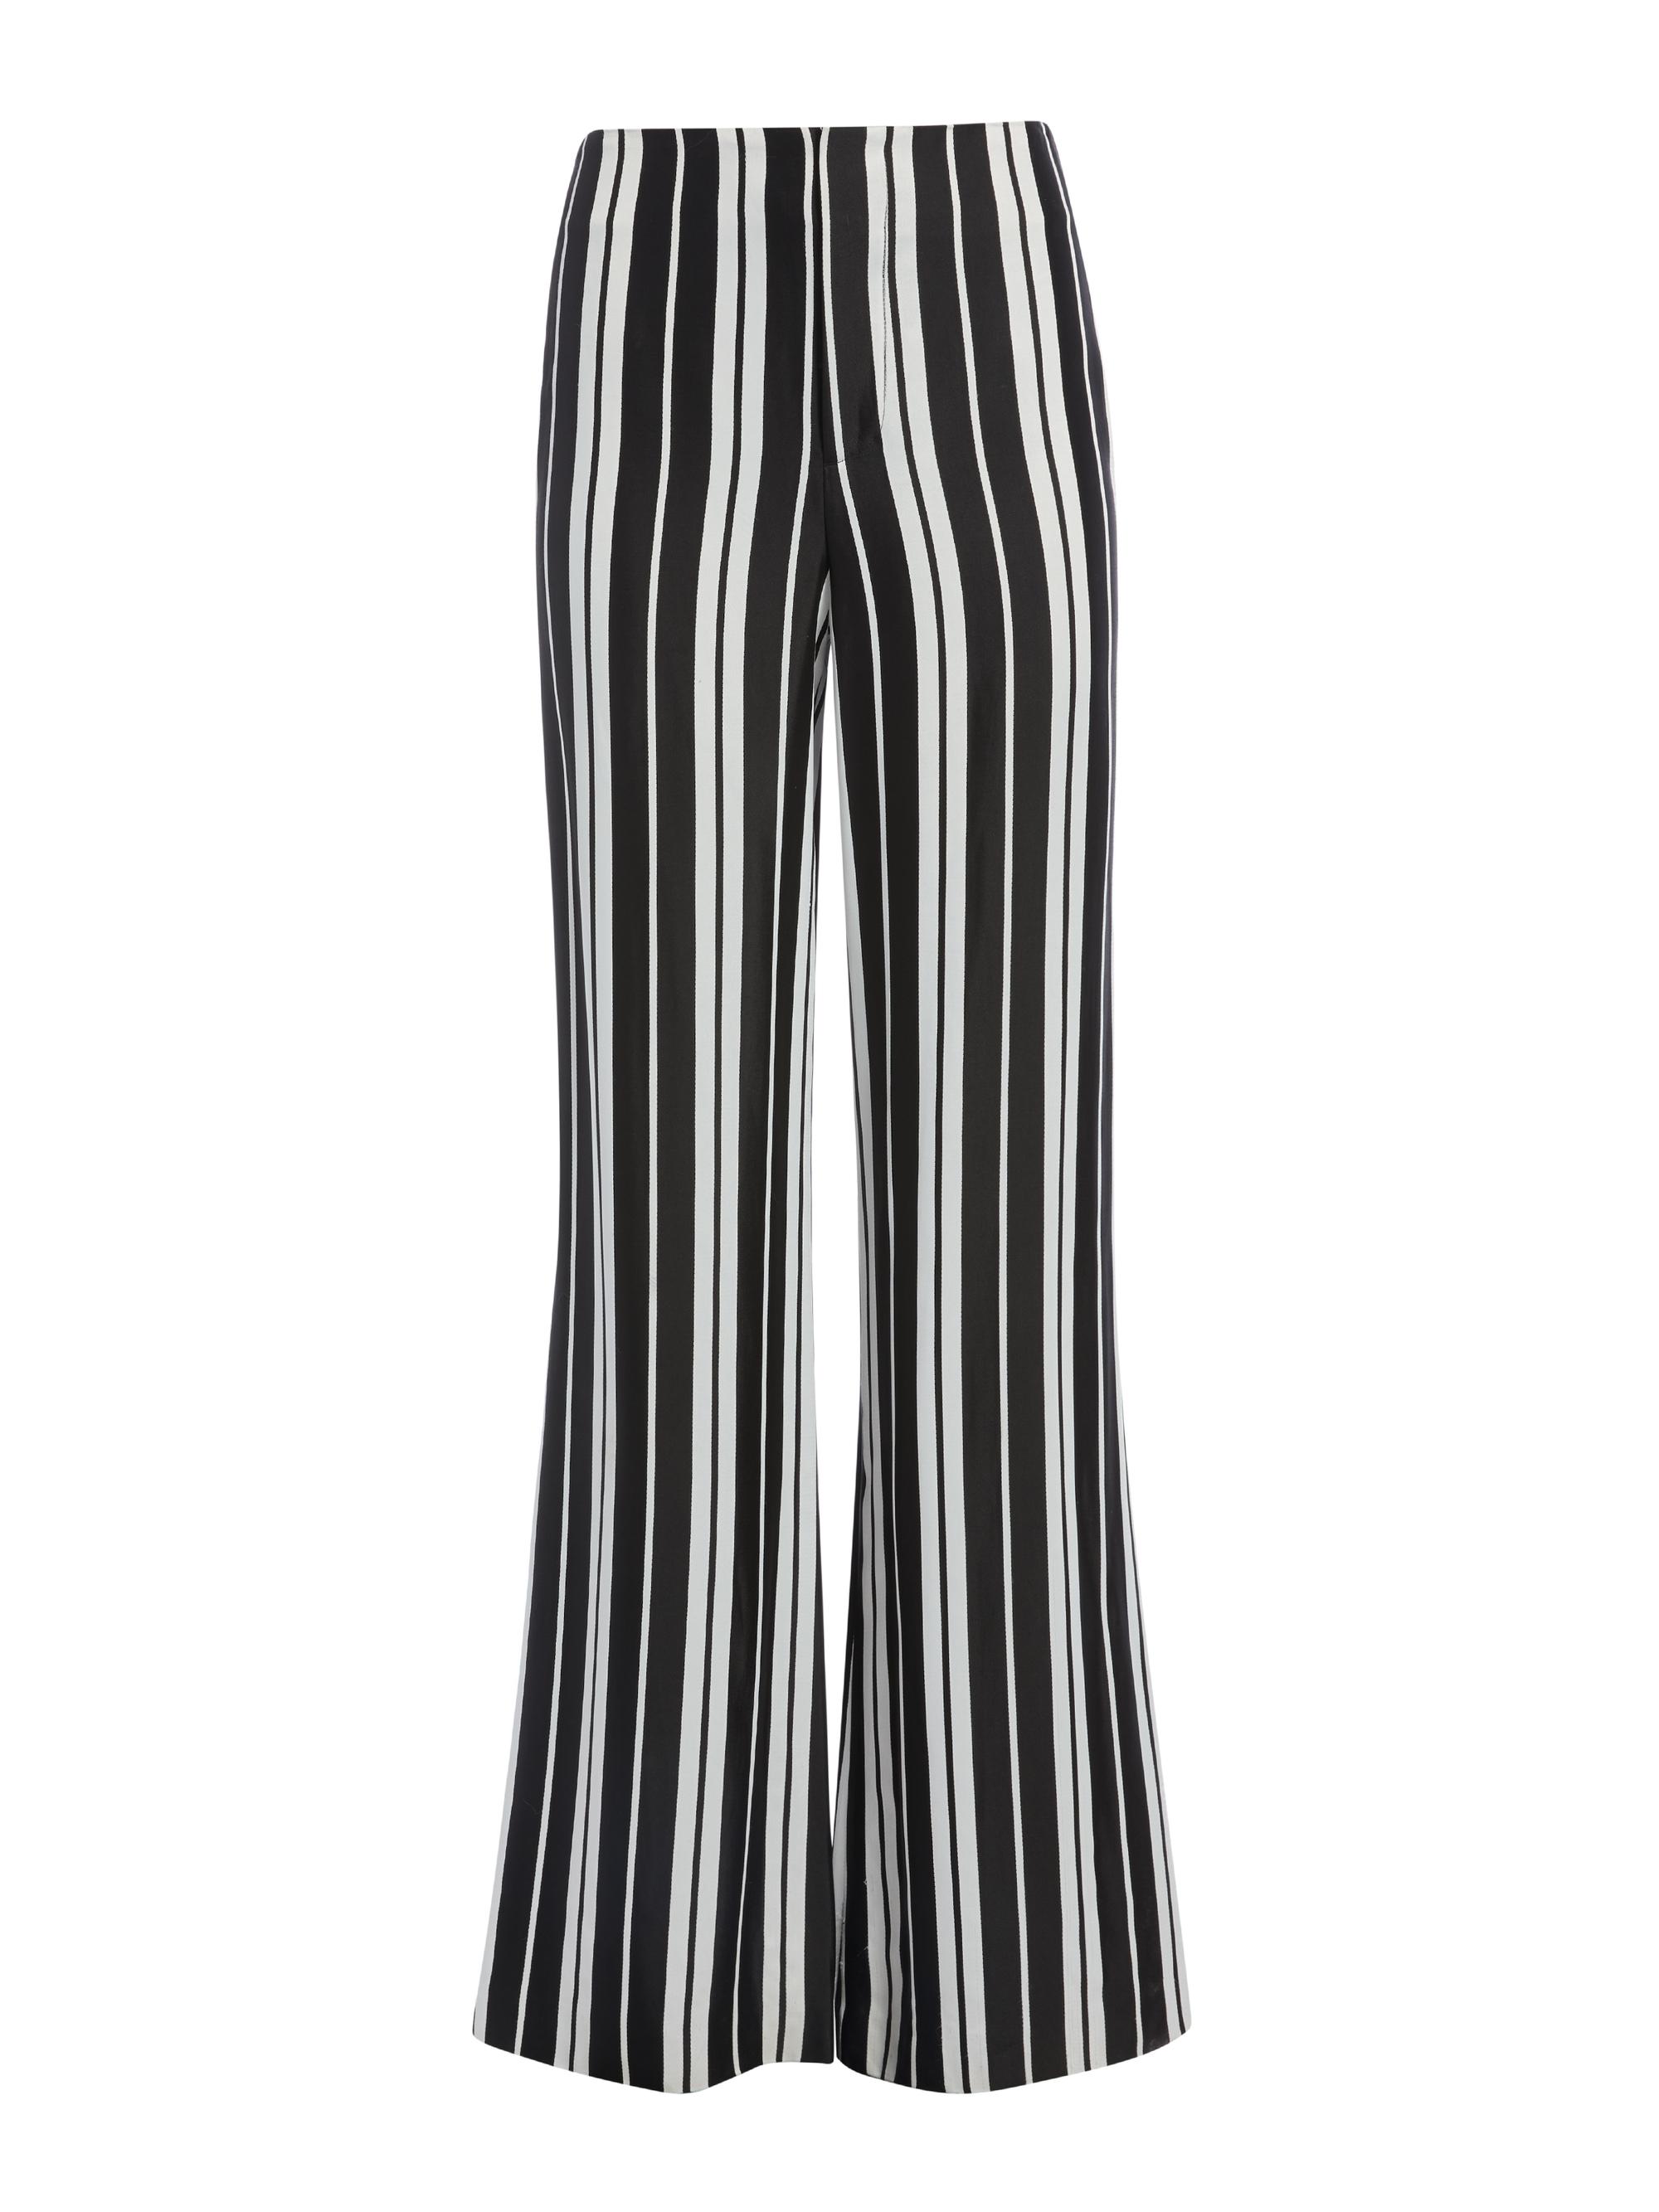 Alice + Olivia Synthetic Dylan Wide Leg Pant in Black White (Black) - Lyst